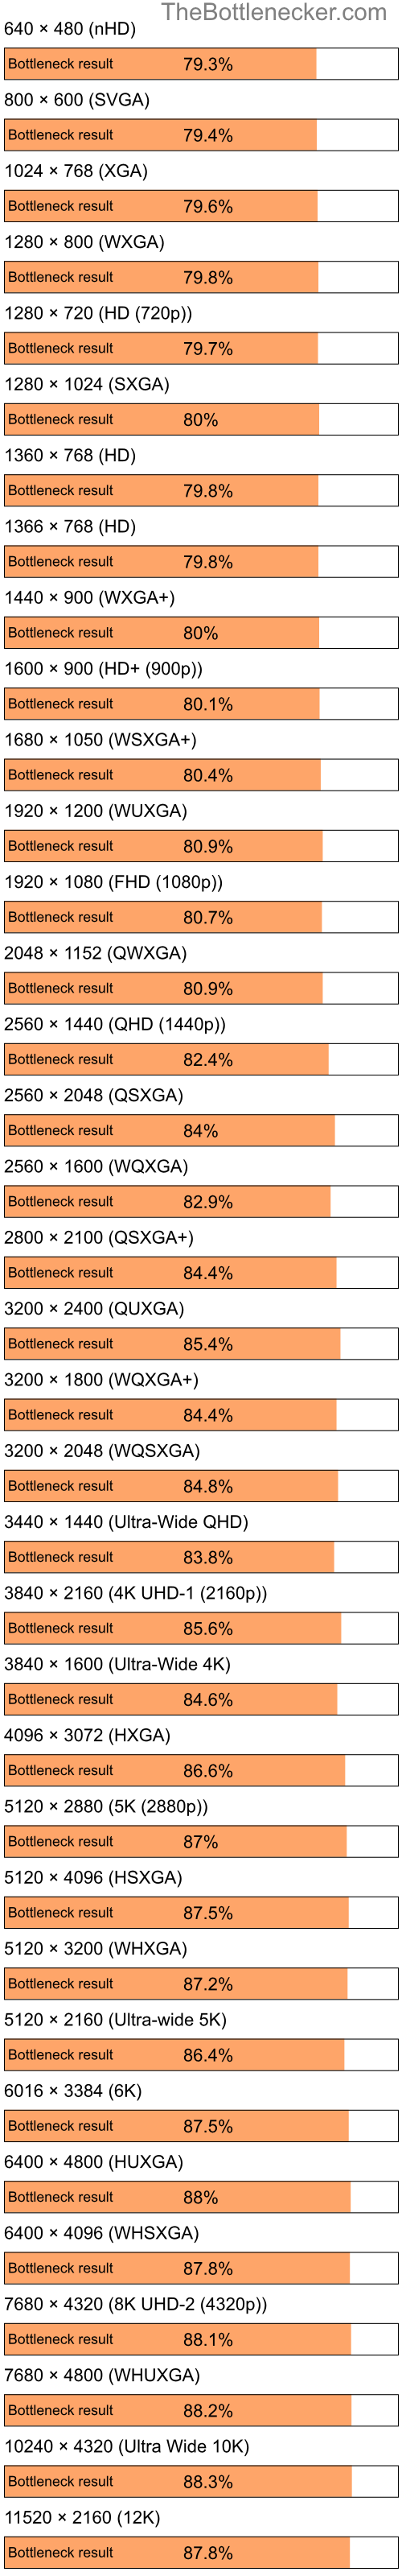 Bottleneck results by resolution for Intel Celeron and AMD Radeon 9500 9700 in Graphic Card Intense Tasks